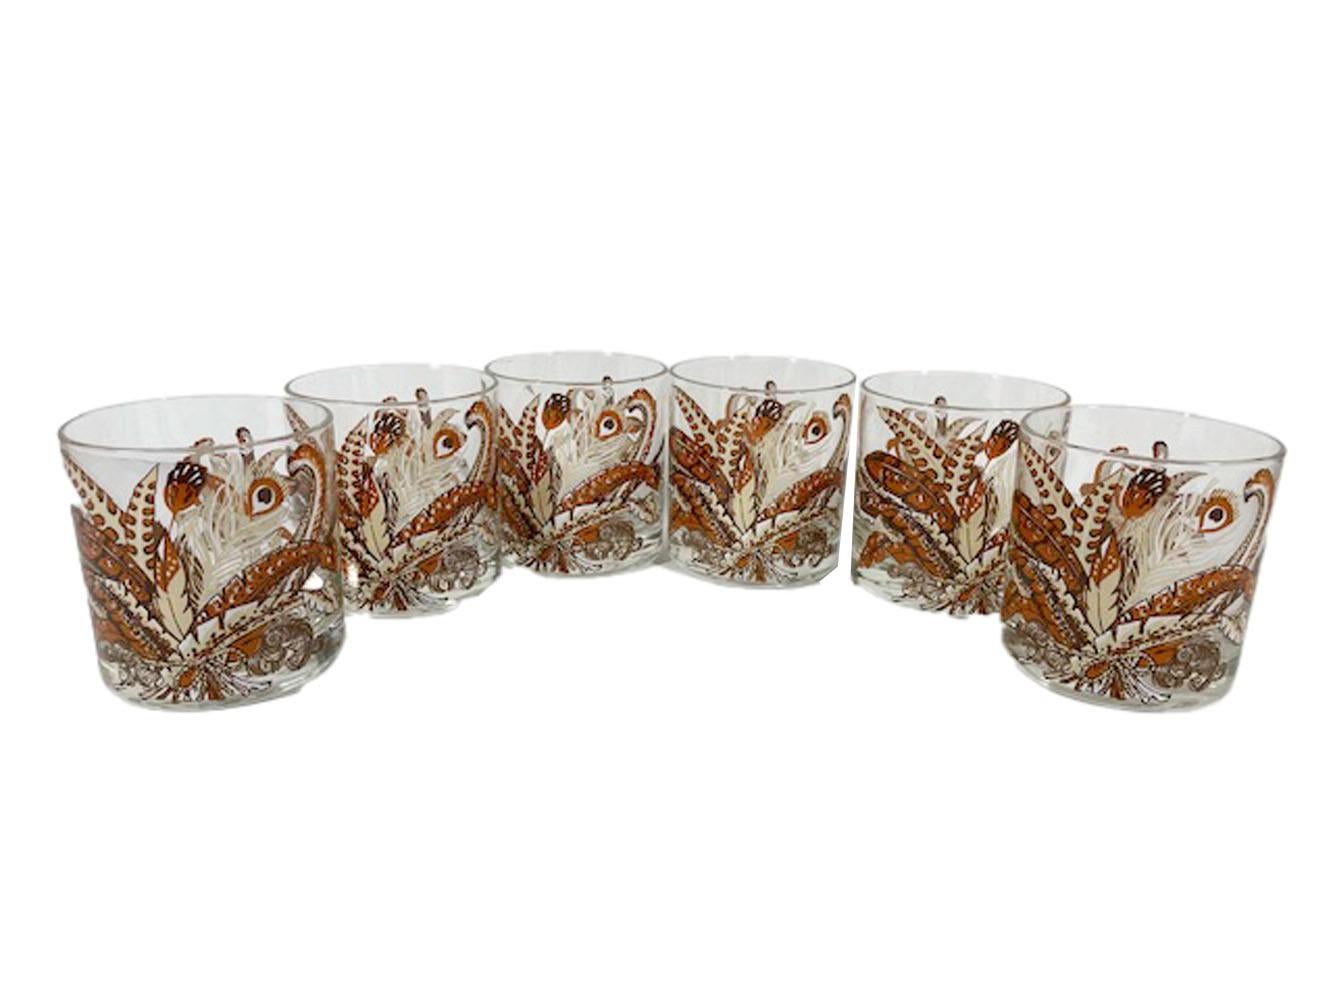 Mid-Century Modern rocks glasses designed by Georges Briard having an arrangement of exotic feathers in white, cream, tan and brown enamel.